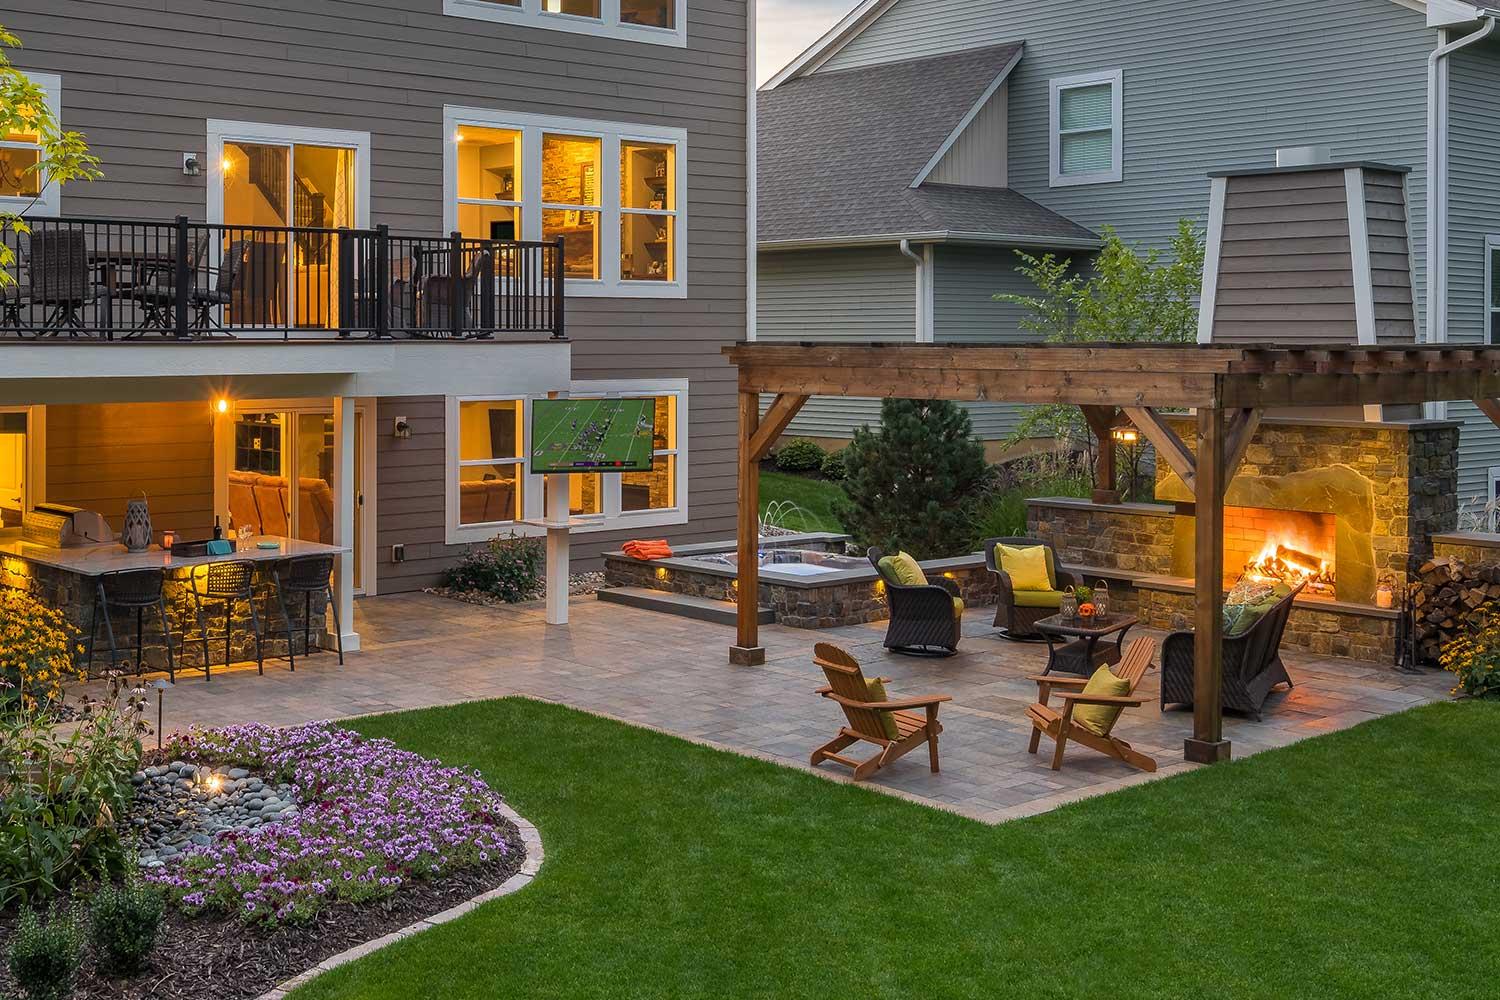 11 Outdoor Rooms & What To Do In Them | Outdoor Living Blog | Southview ...